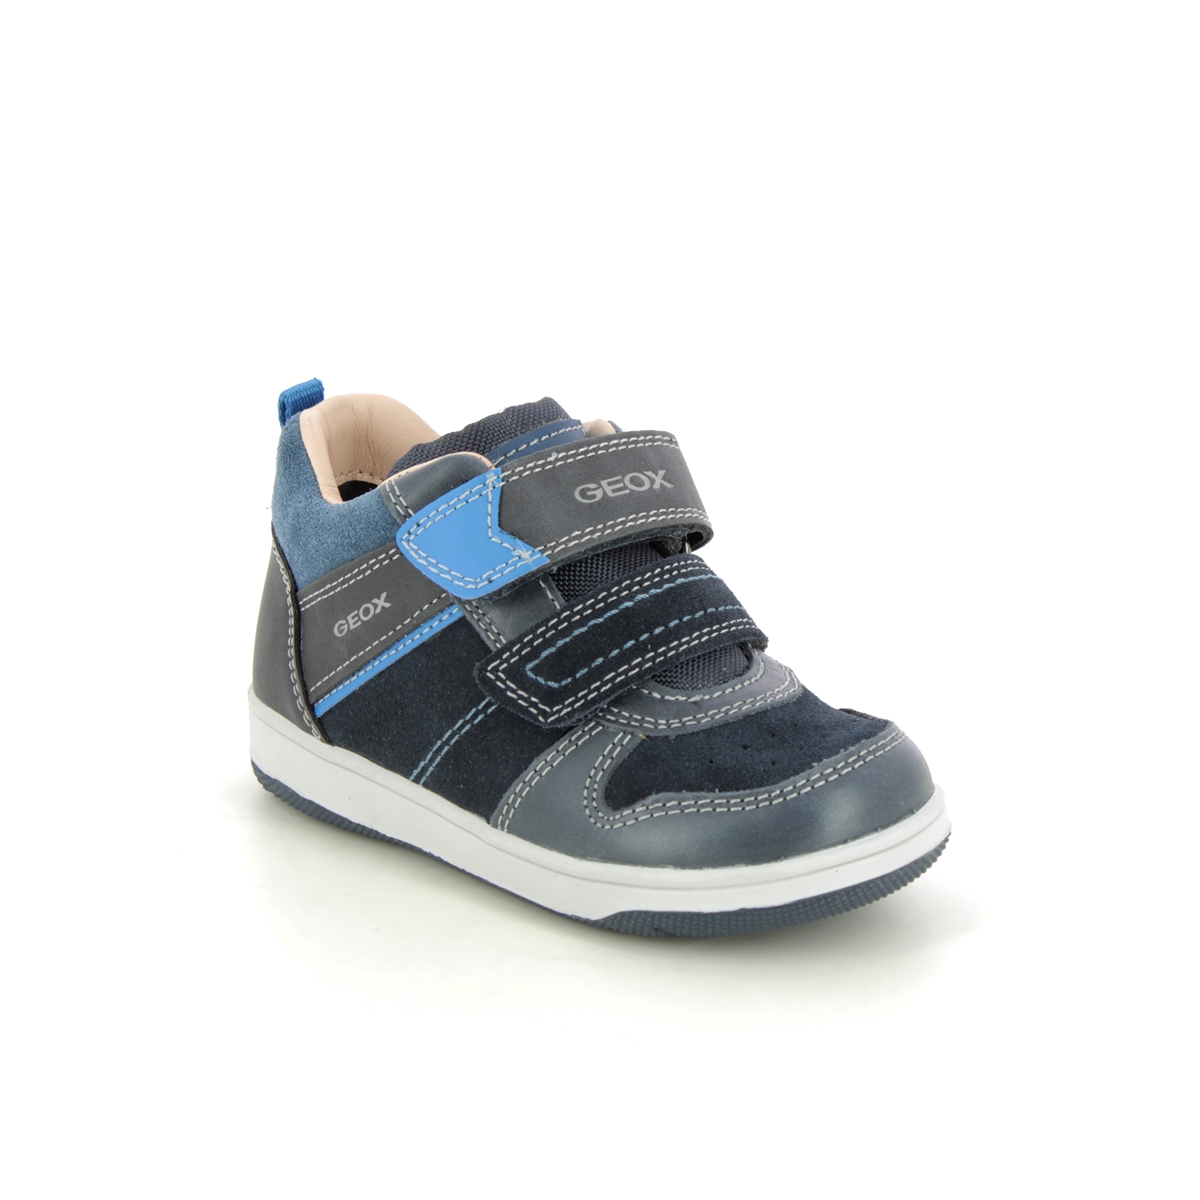 Geox - New Flick B 2V (Navy Leather) B161La-C4231 In Size 21 In Plain Navy Leather For kids